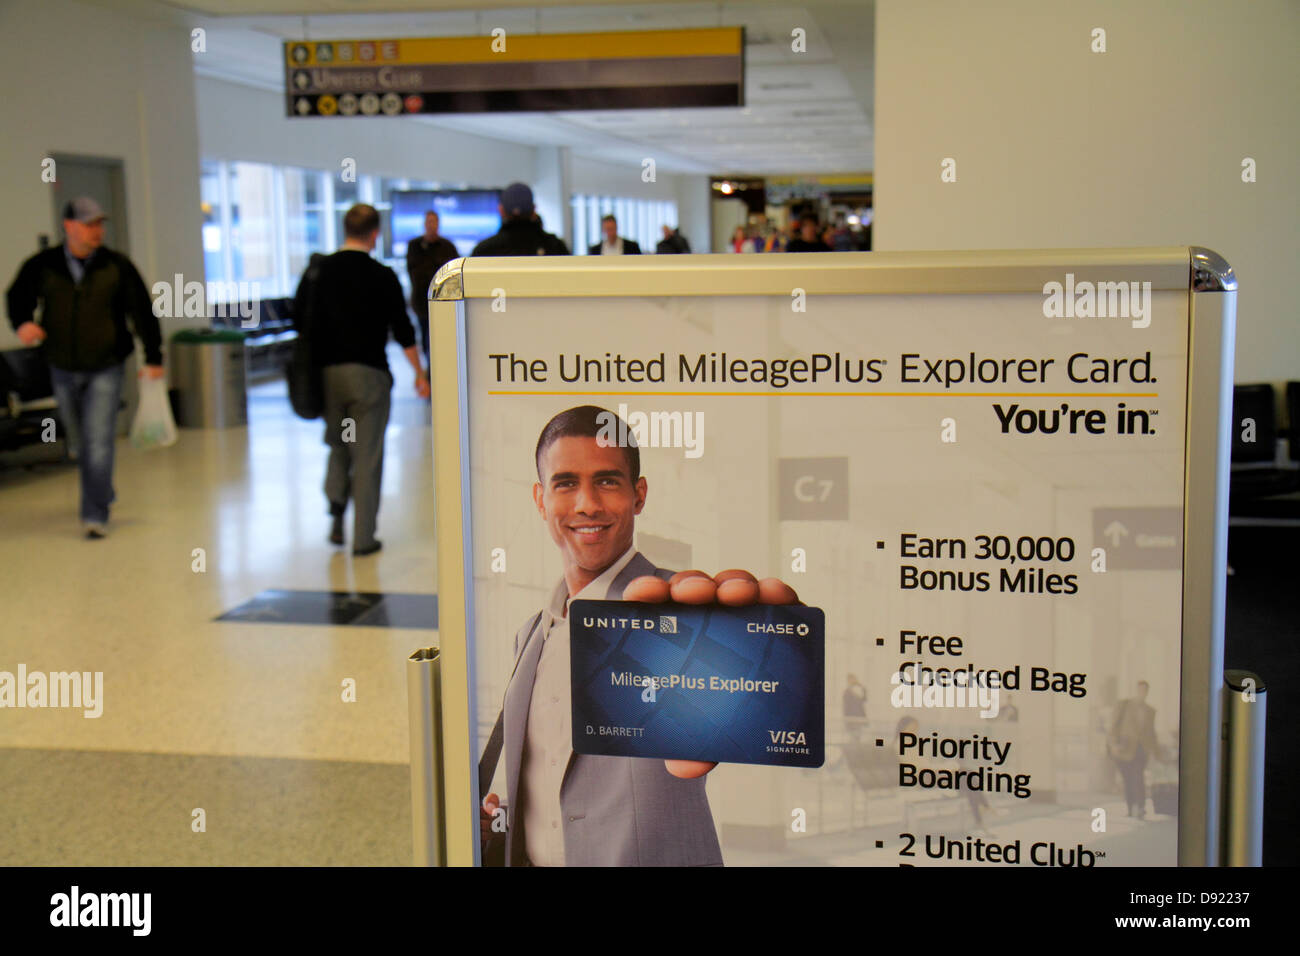 Texas,South,Southwest,Houston,George Bush Intercontinental Airport,IAH,gate,special,carta di credito,United MileagePlus Explorer card,look alimes,double,Bar Foto Stock